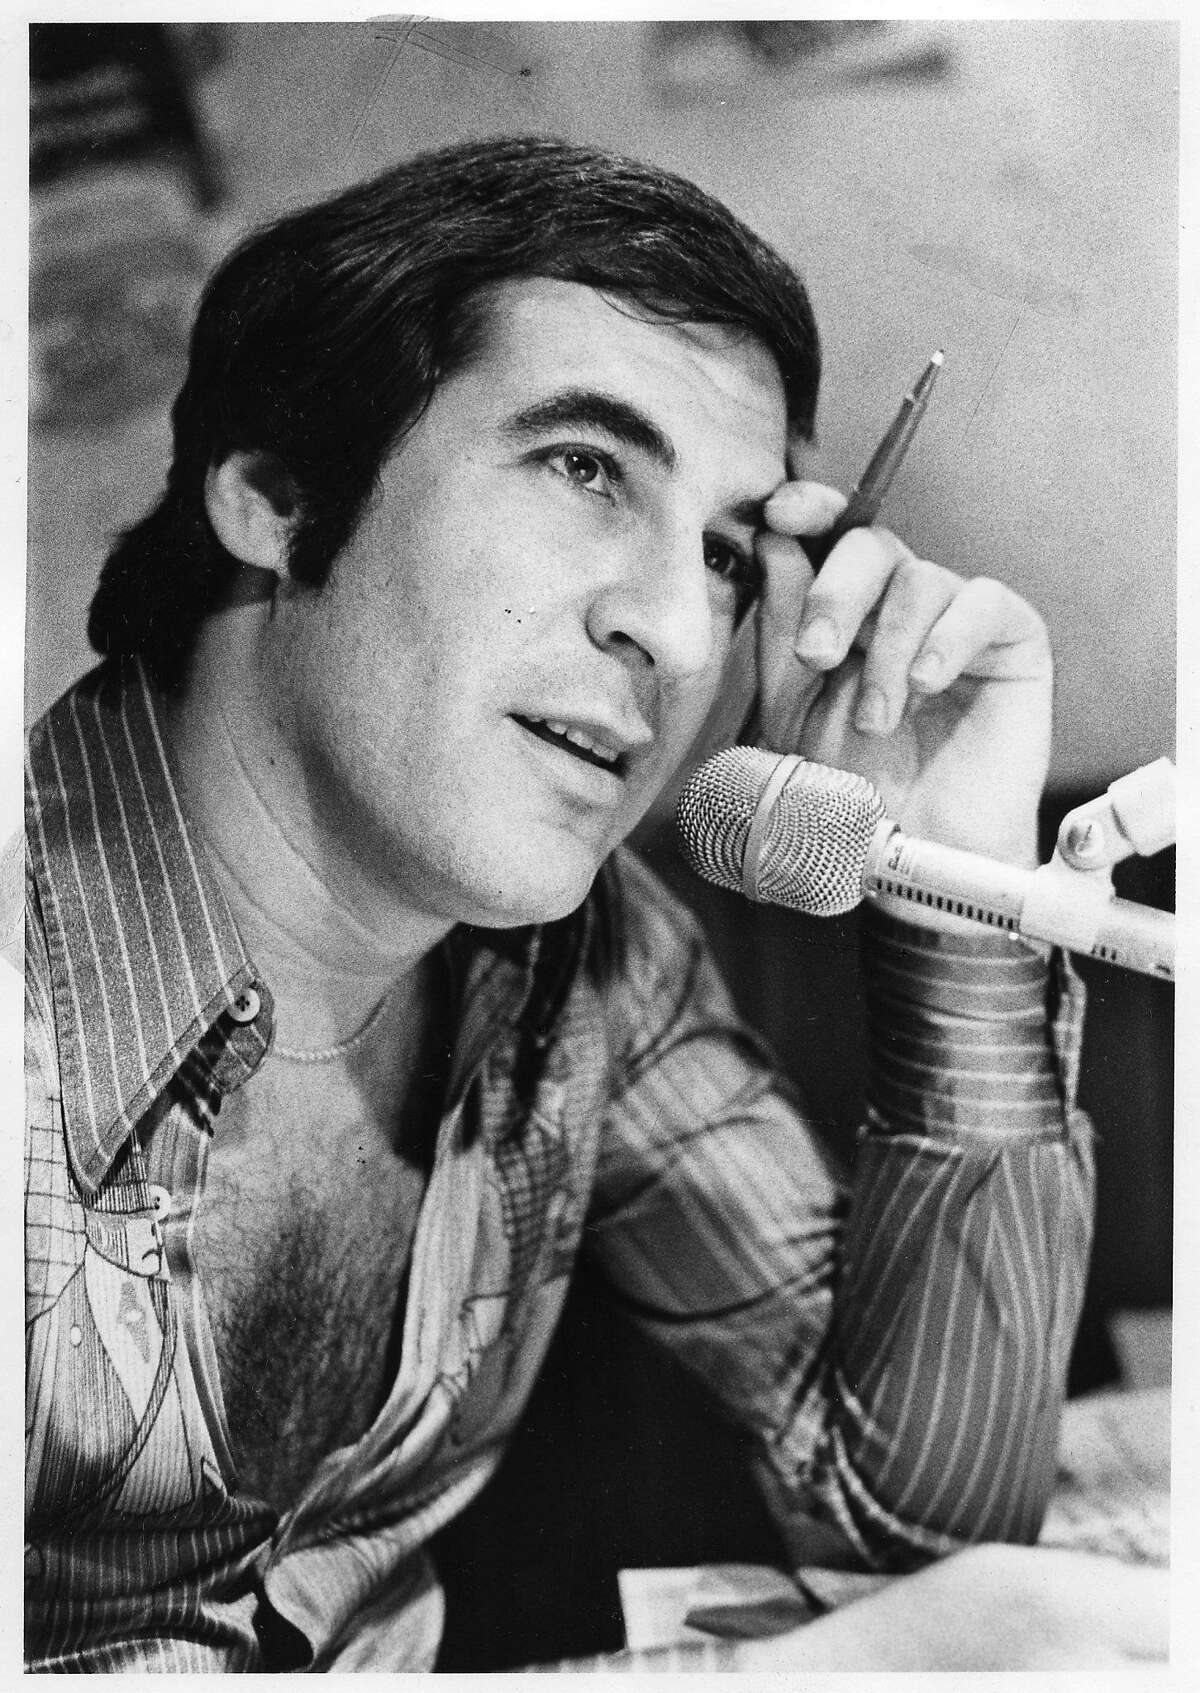 Ronn Owens in a 1976 photo provided by KGO, shortly after he joined the station.